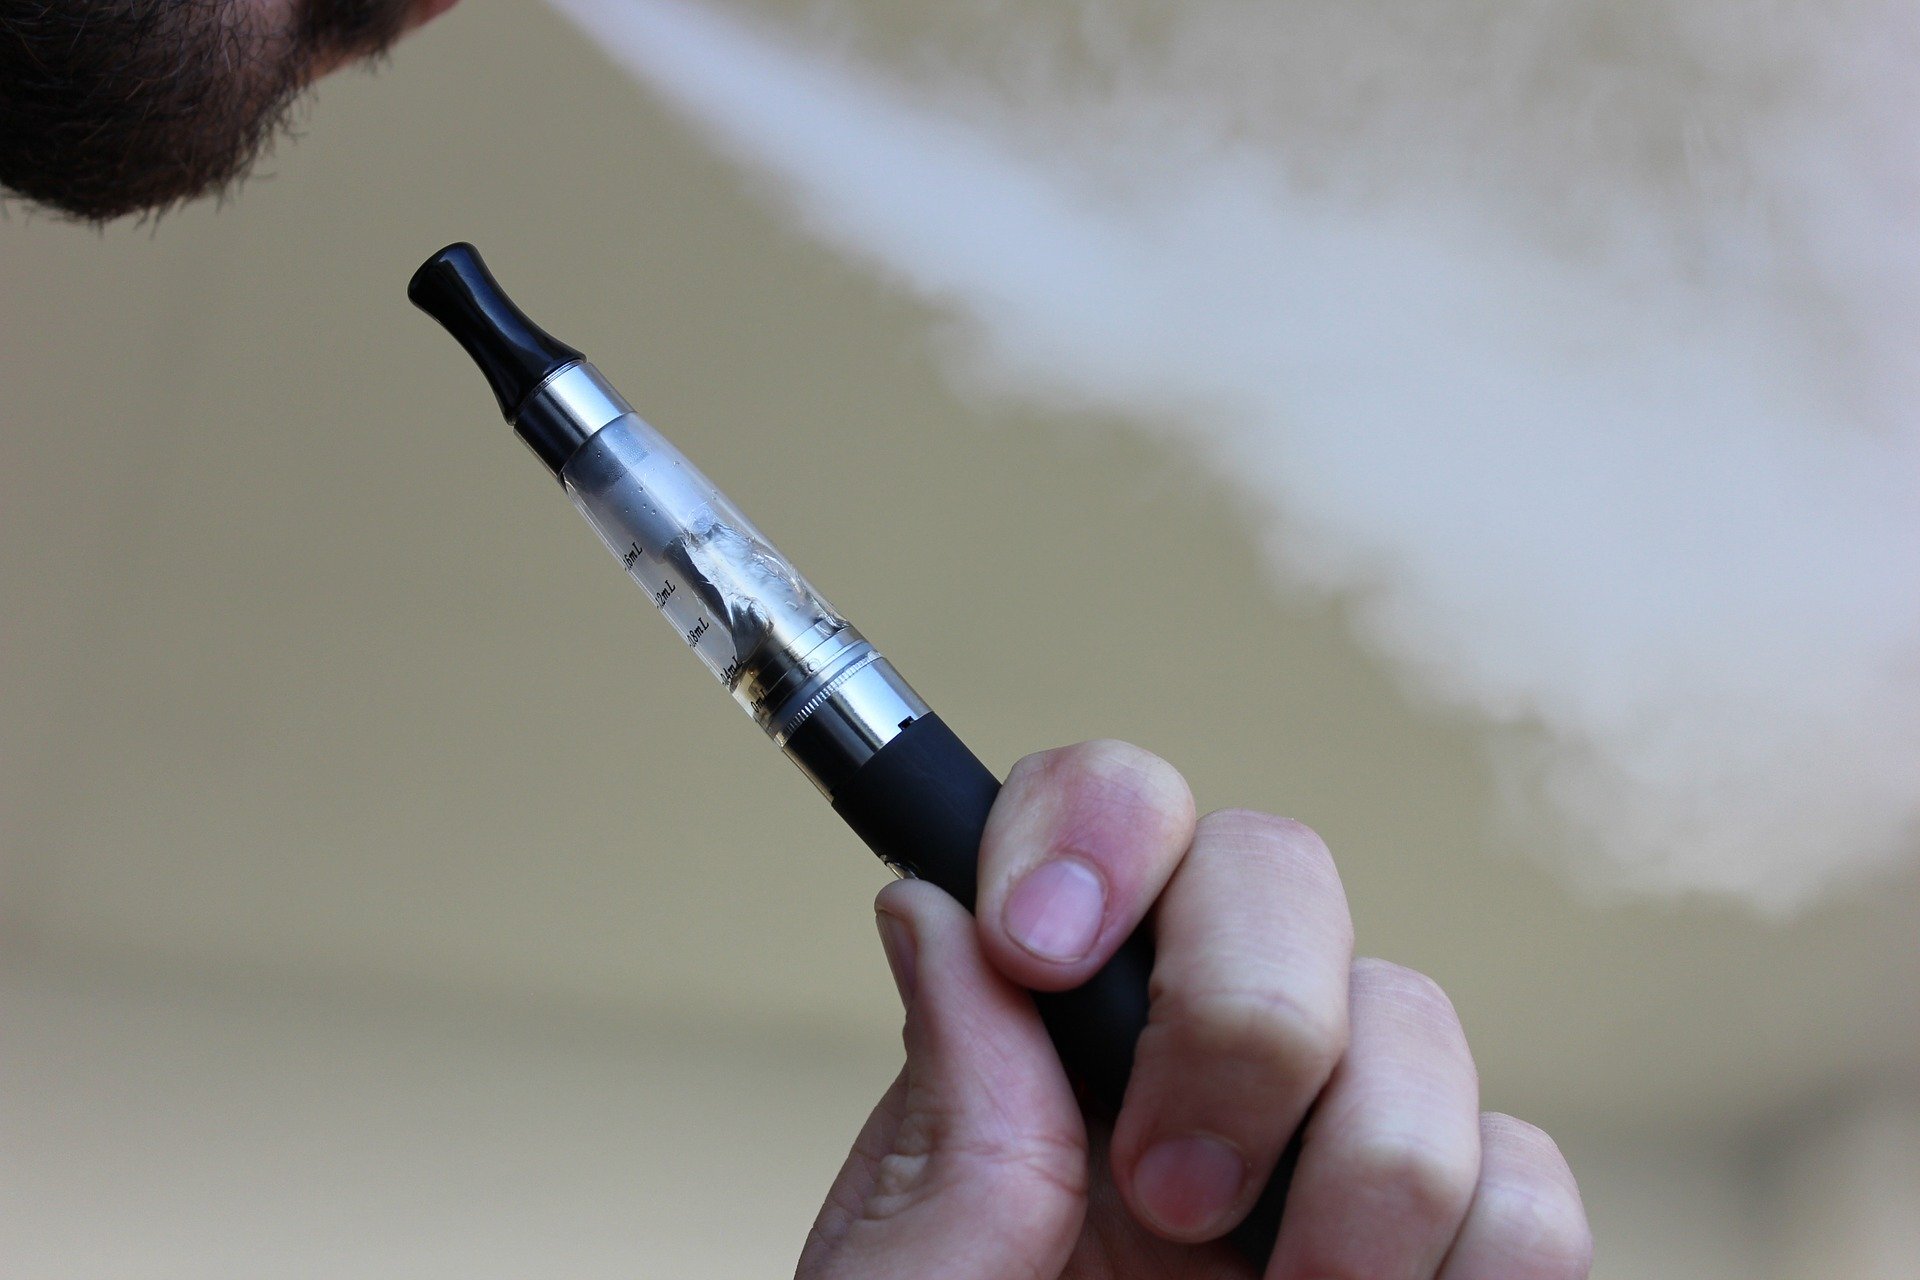 #Vape starter kits could help smokers quit